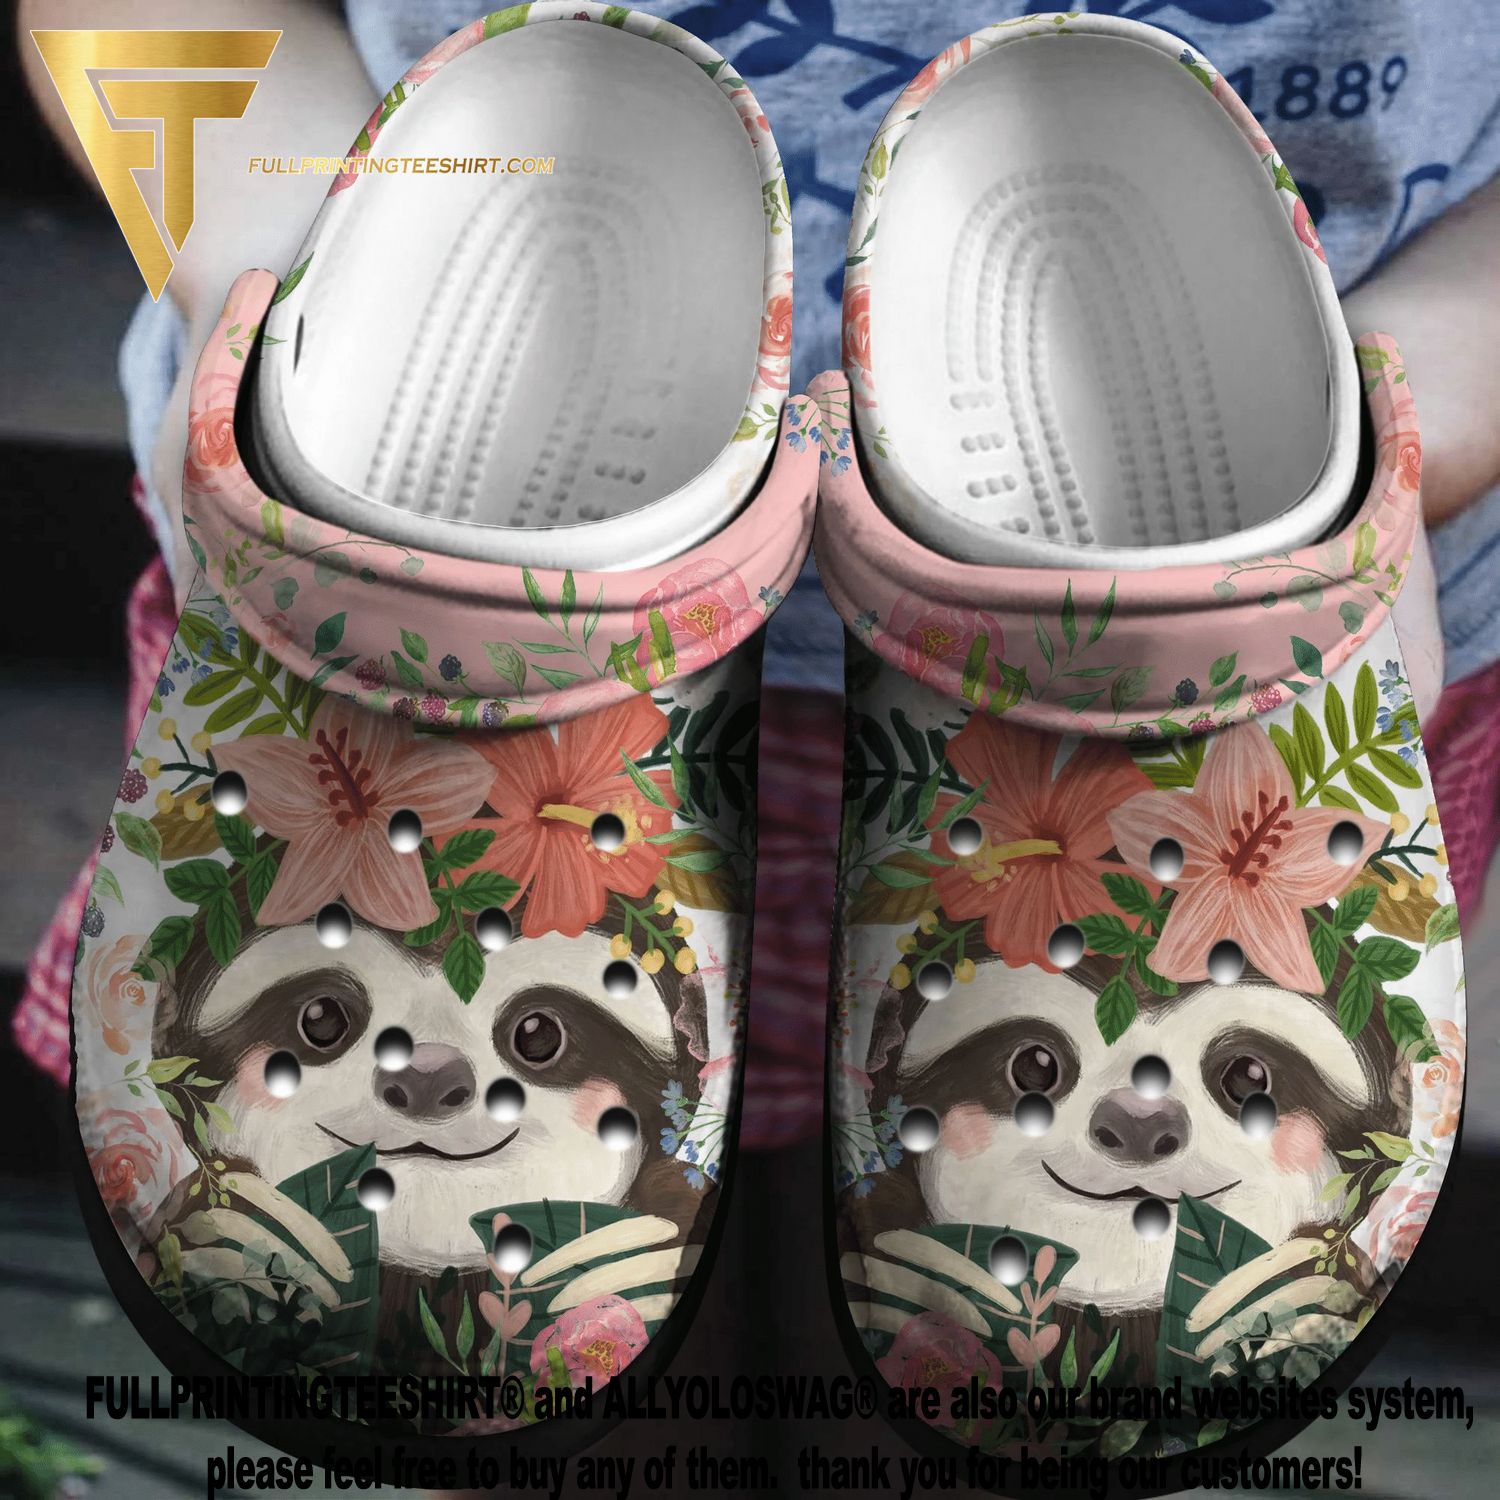 Top-selling Item] Personalized Name Dr Pepper Soda Pop 3D Crocs Shoes